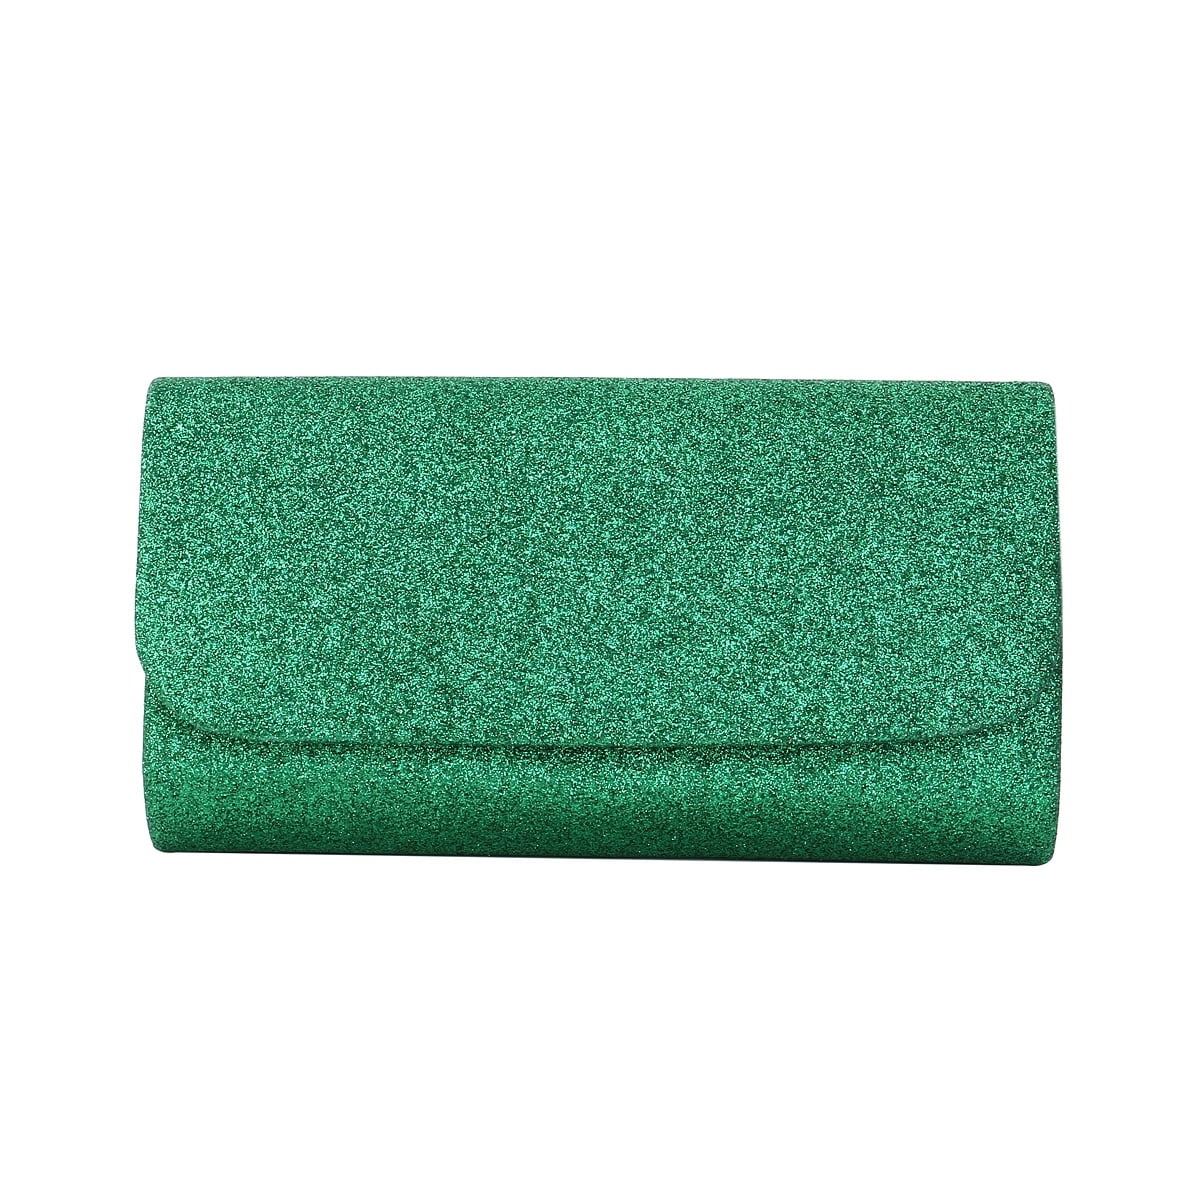 Champagne and Emerald Green Bridal Clutch Mother of the Bride Gift